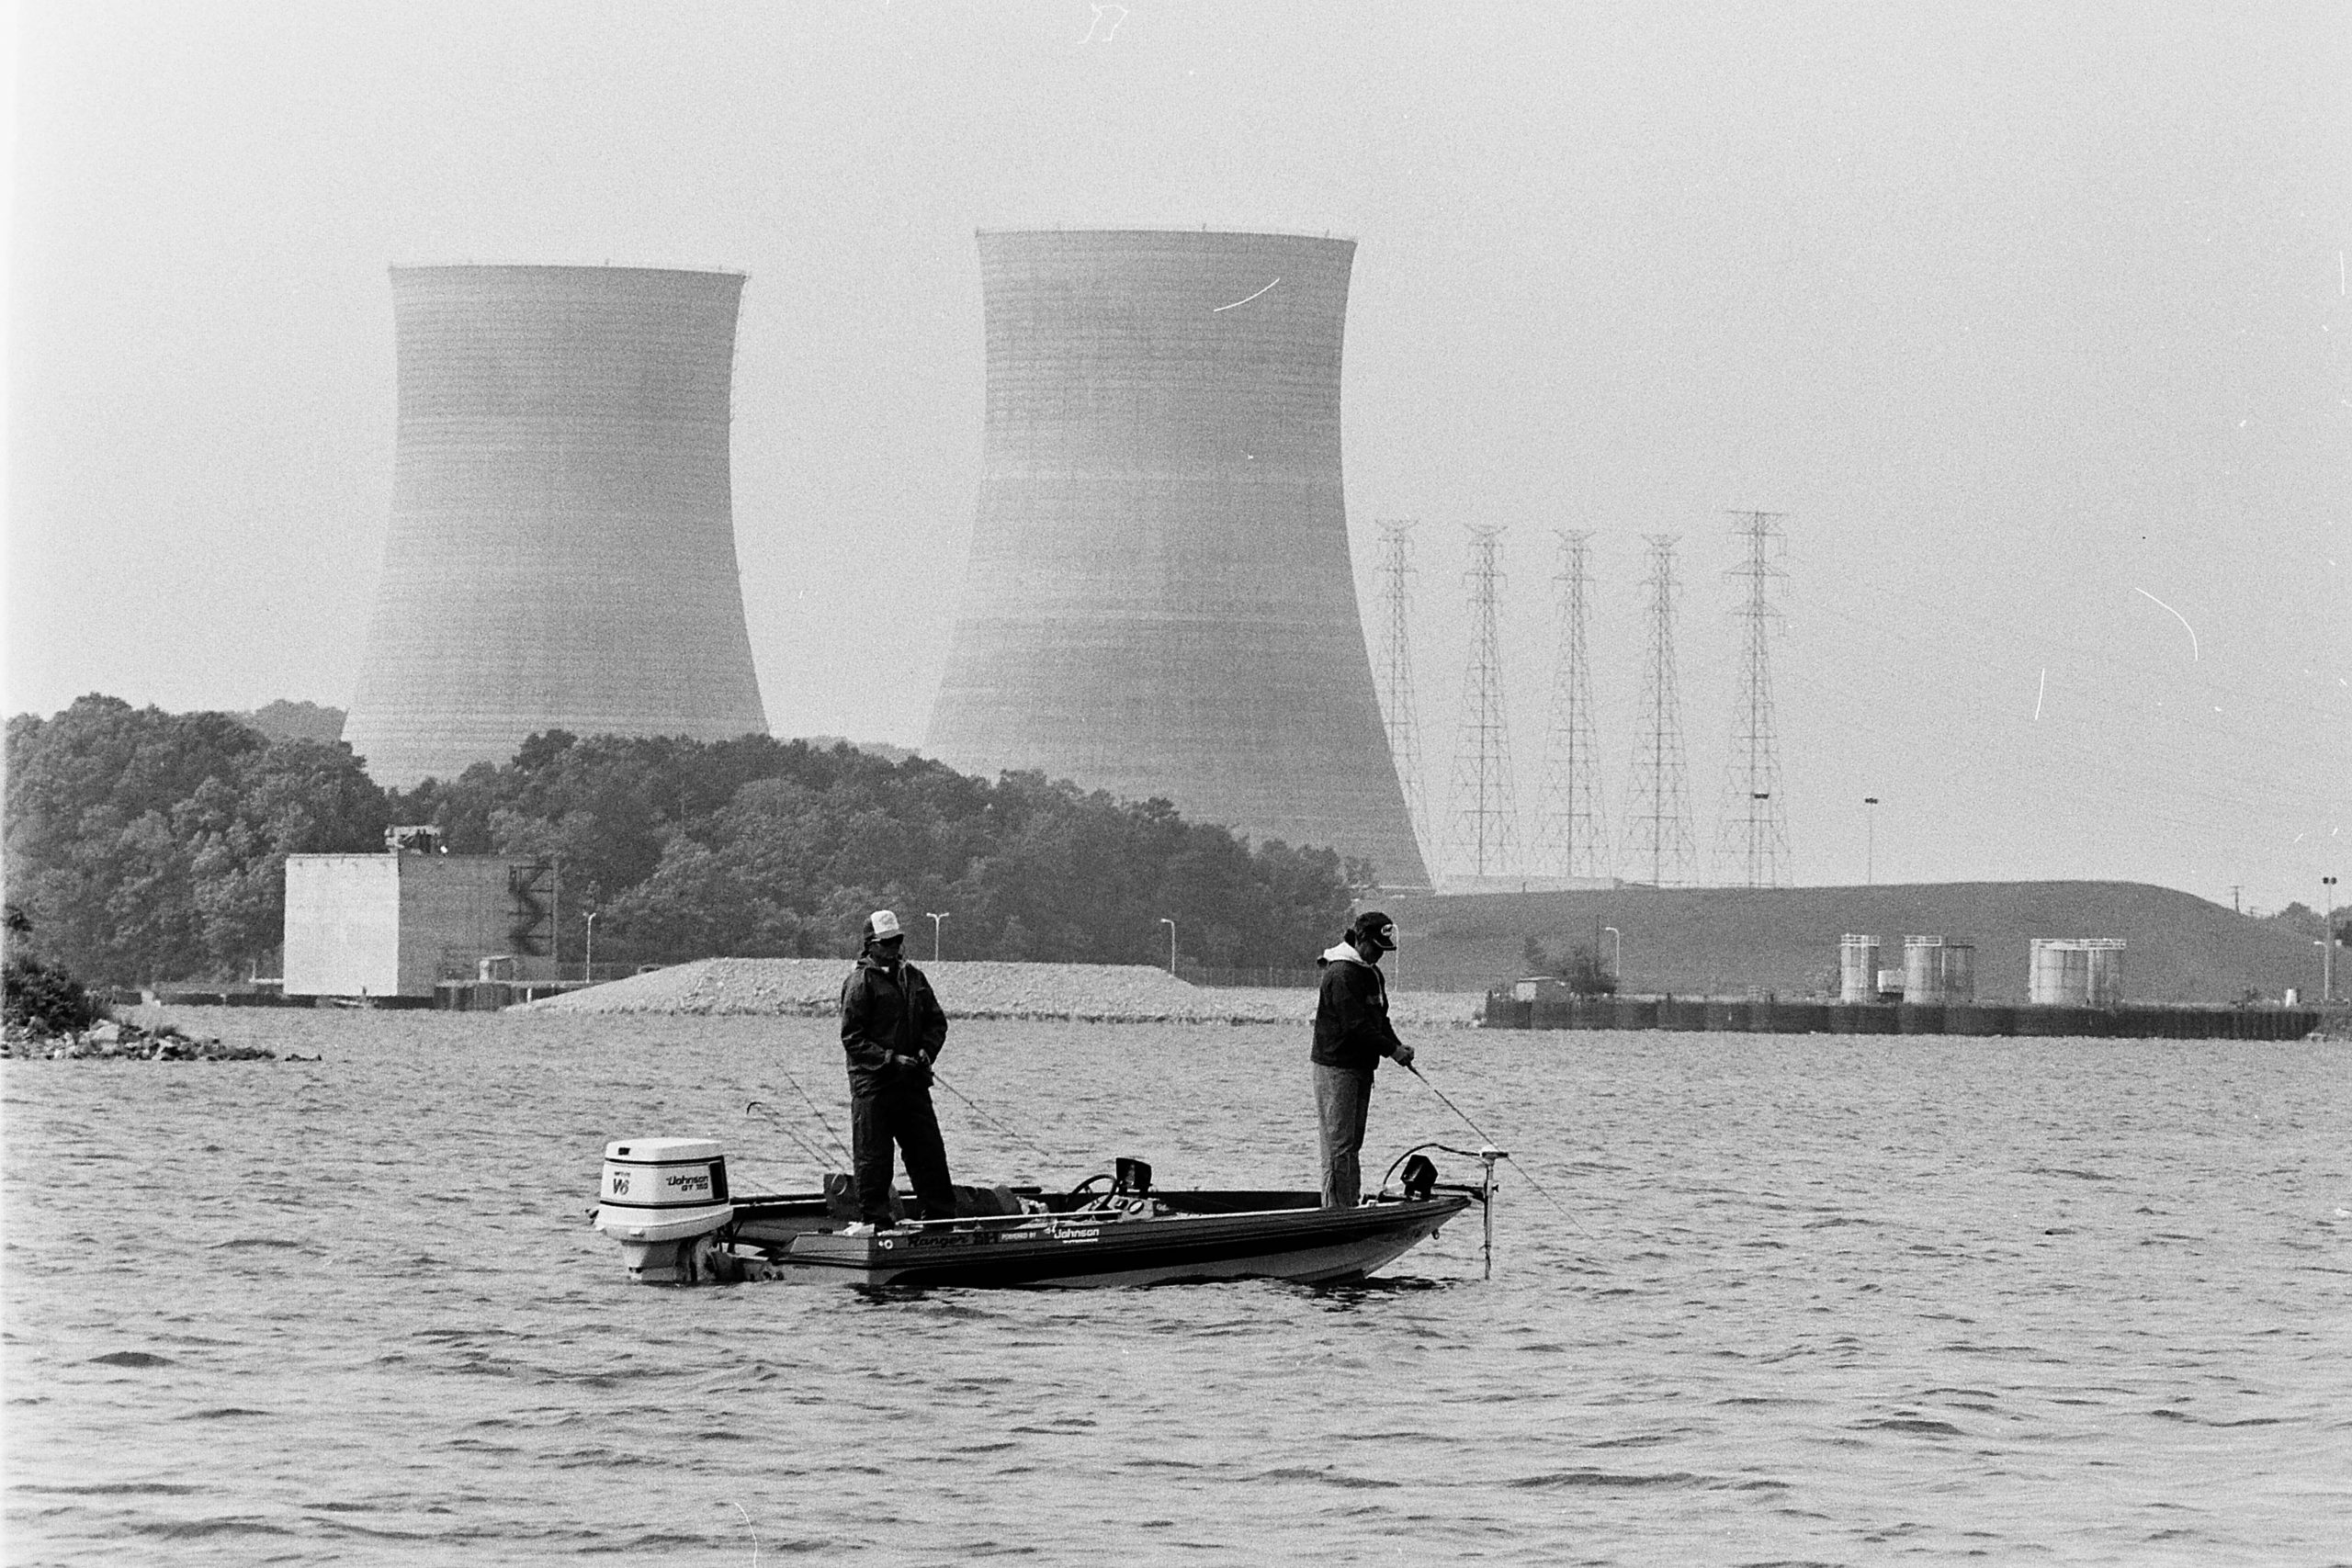 The boats and the anglers will be different now, 29 years after the Chattanooga Invitational, but the scenery will be about the same. Shots of these cooling towers appear in every batch of tournament photos from this lake, and weâre sure to see them in BASSfest photos.